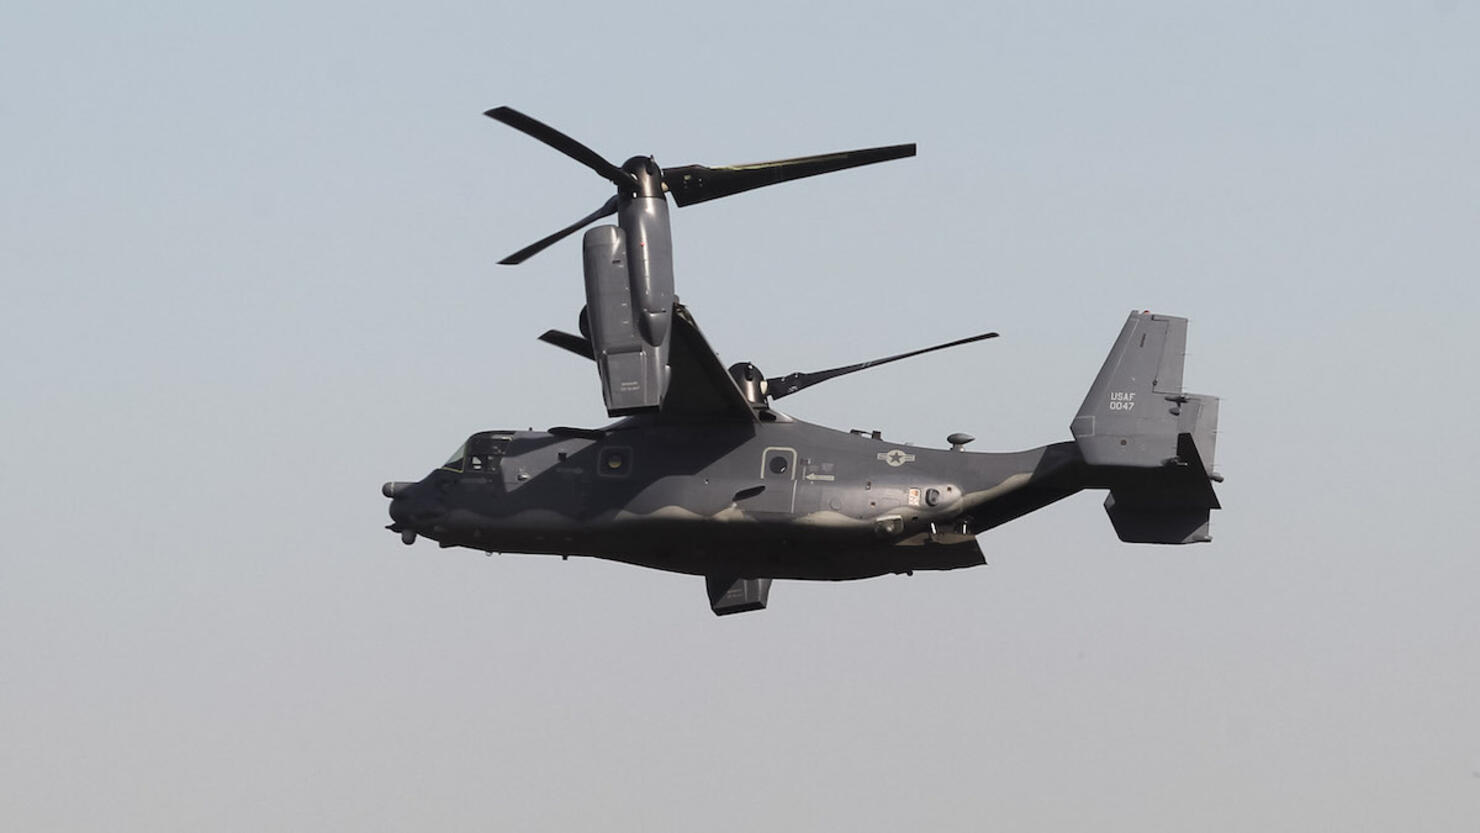 The U.S. Air Forces CV-22B Aircrafts Fly Over Kyiv